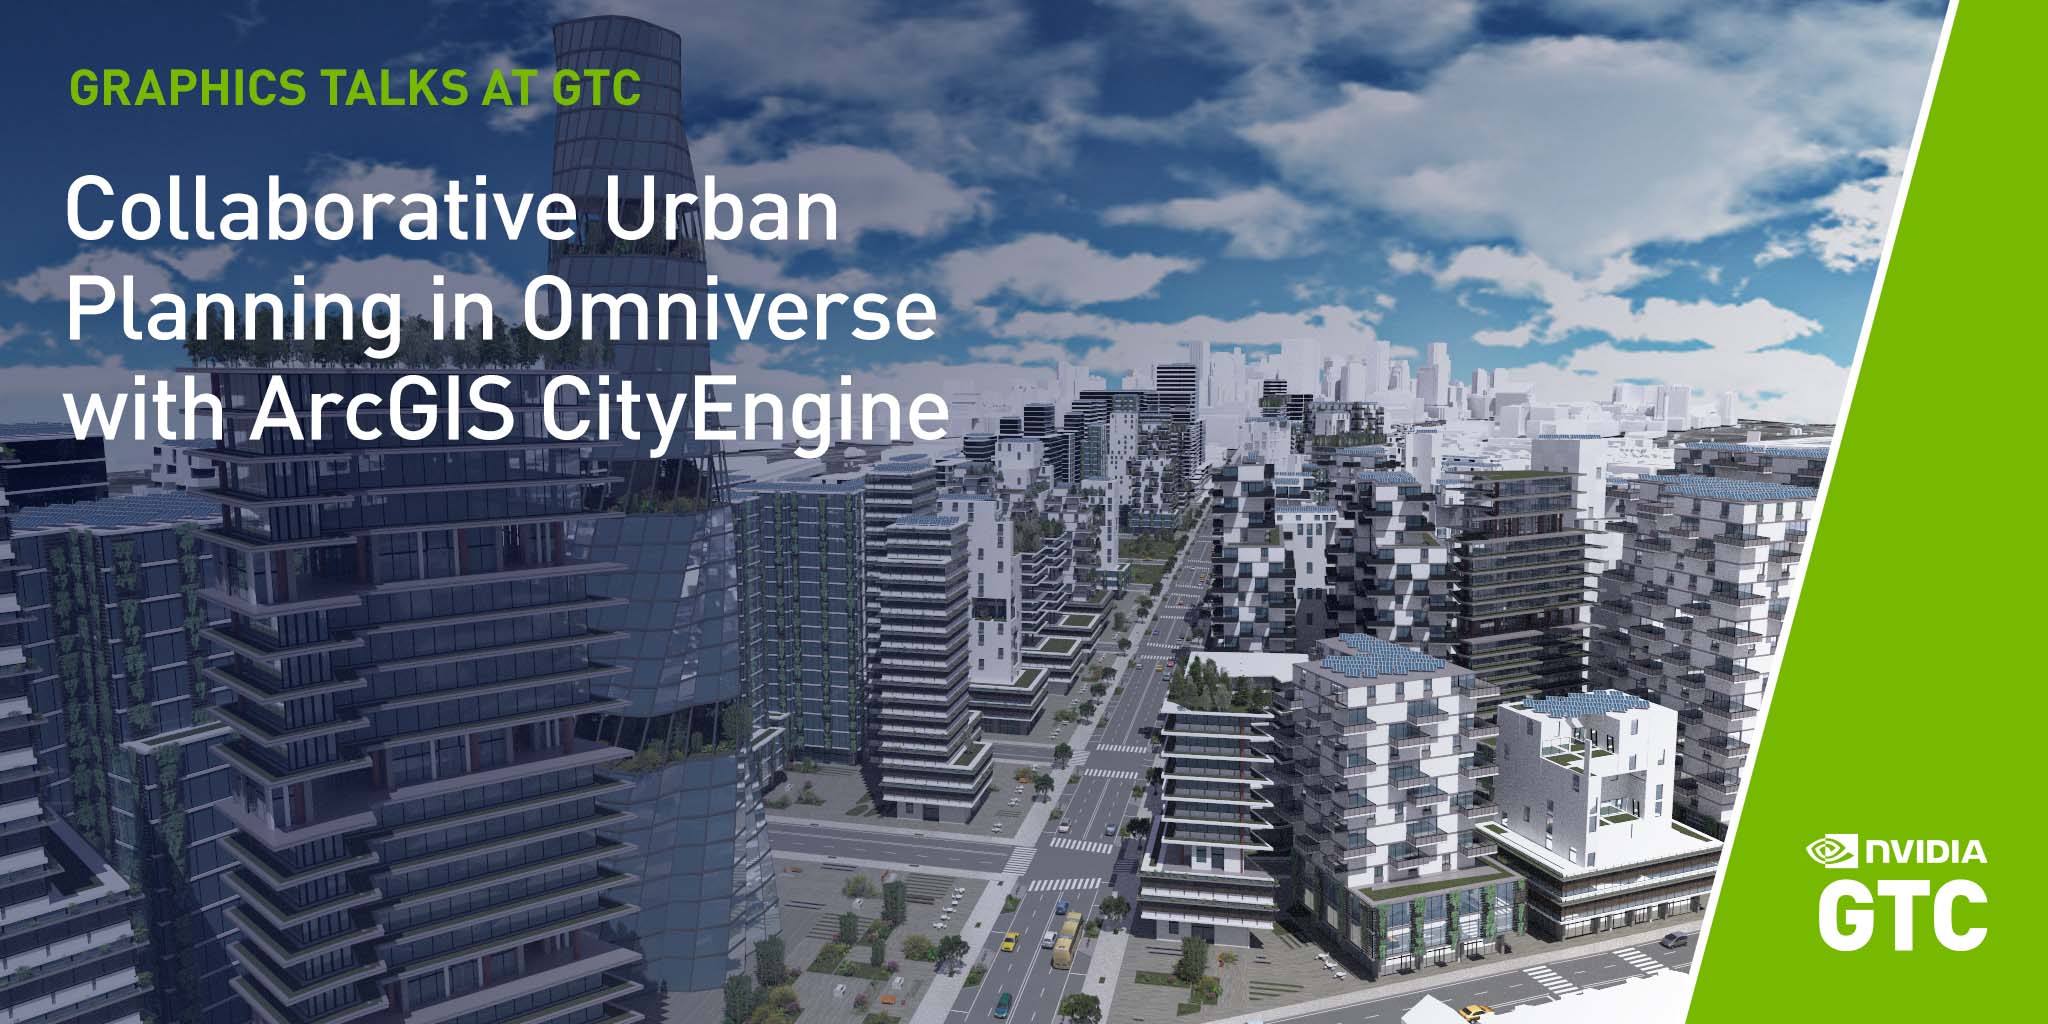 NVIDIA GTC Fall 2021 Collaborative Urban Planning in Omniverse with ArcGIS CityEngine